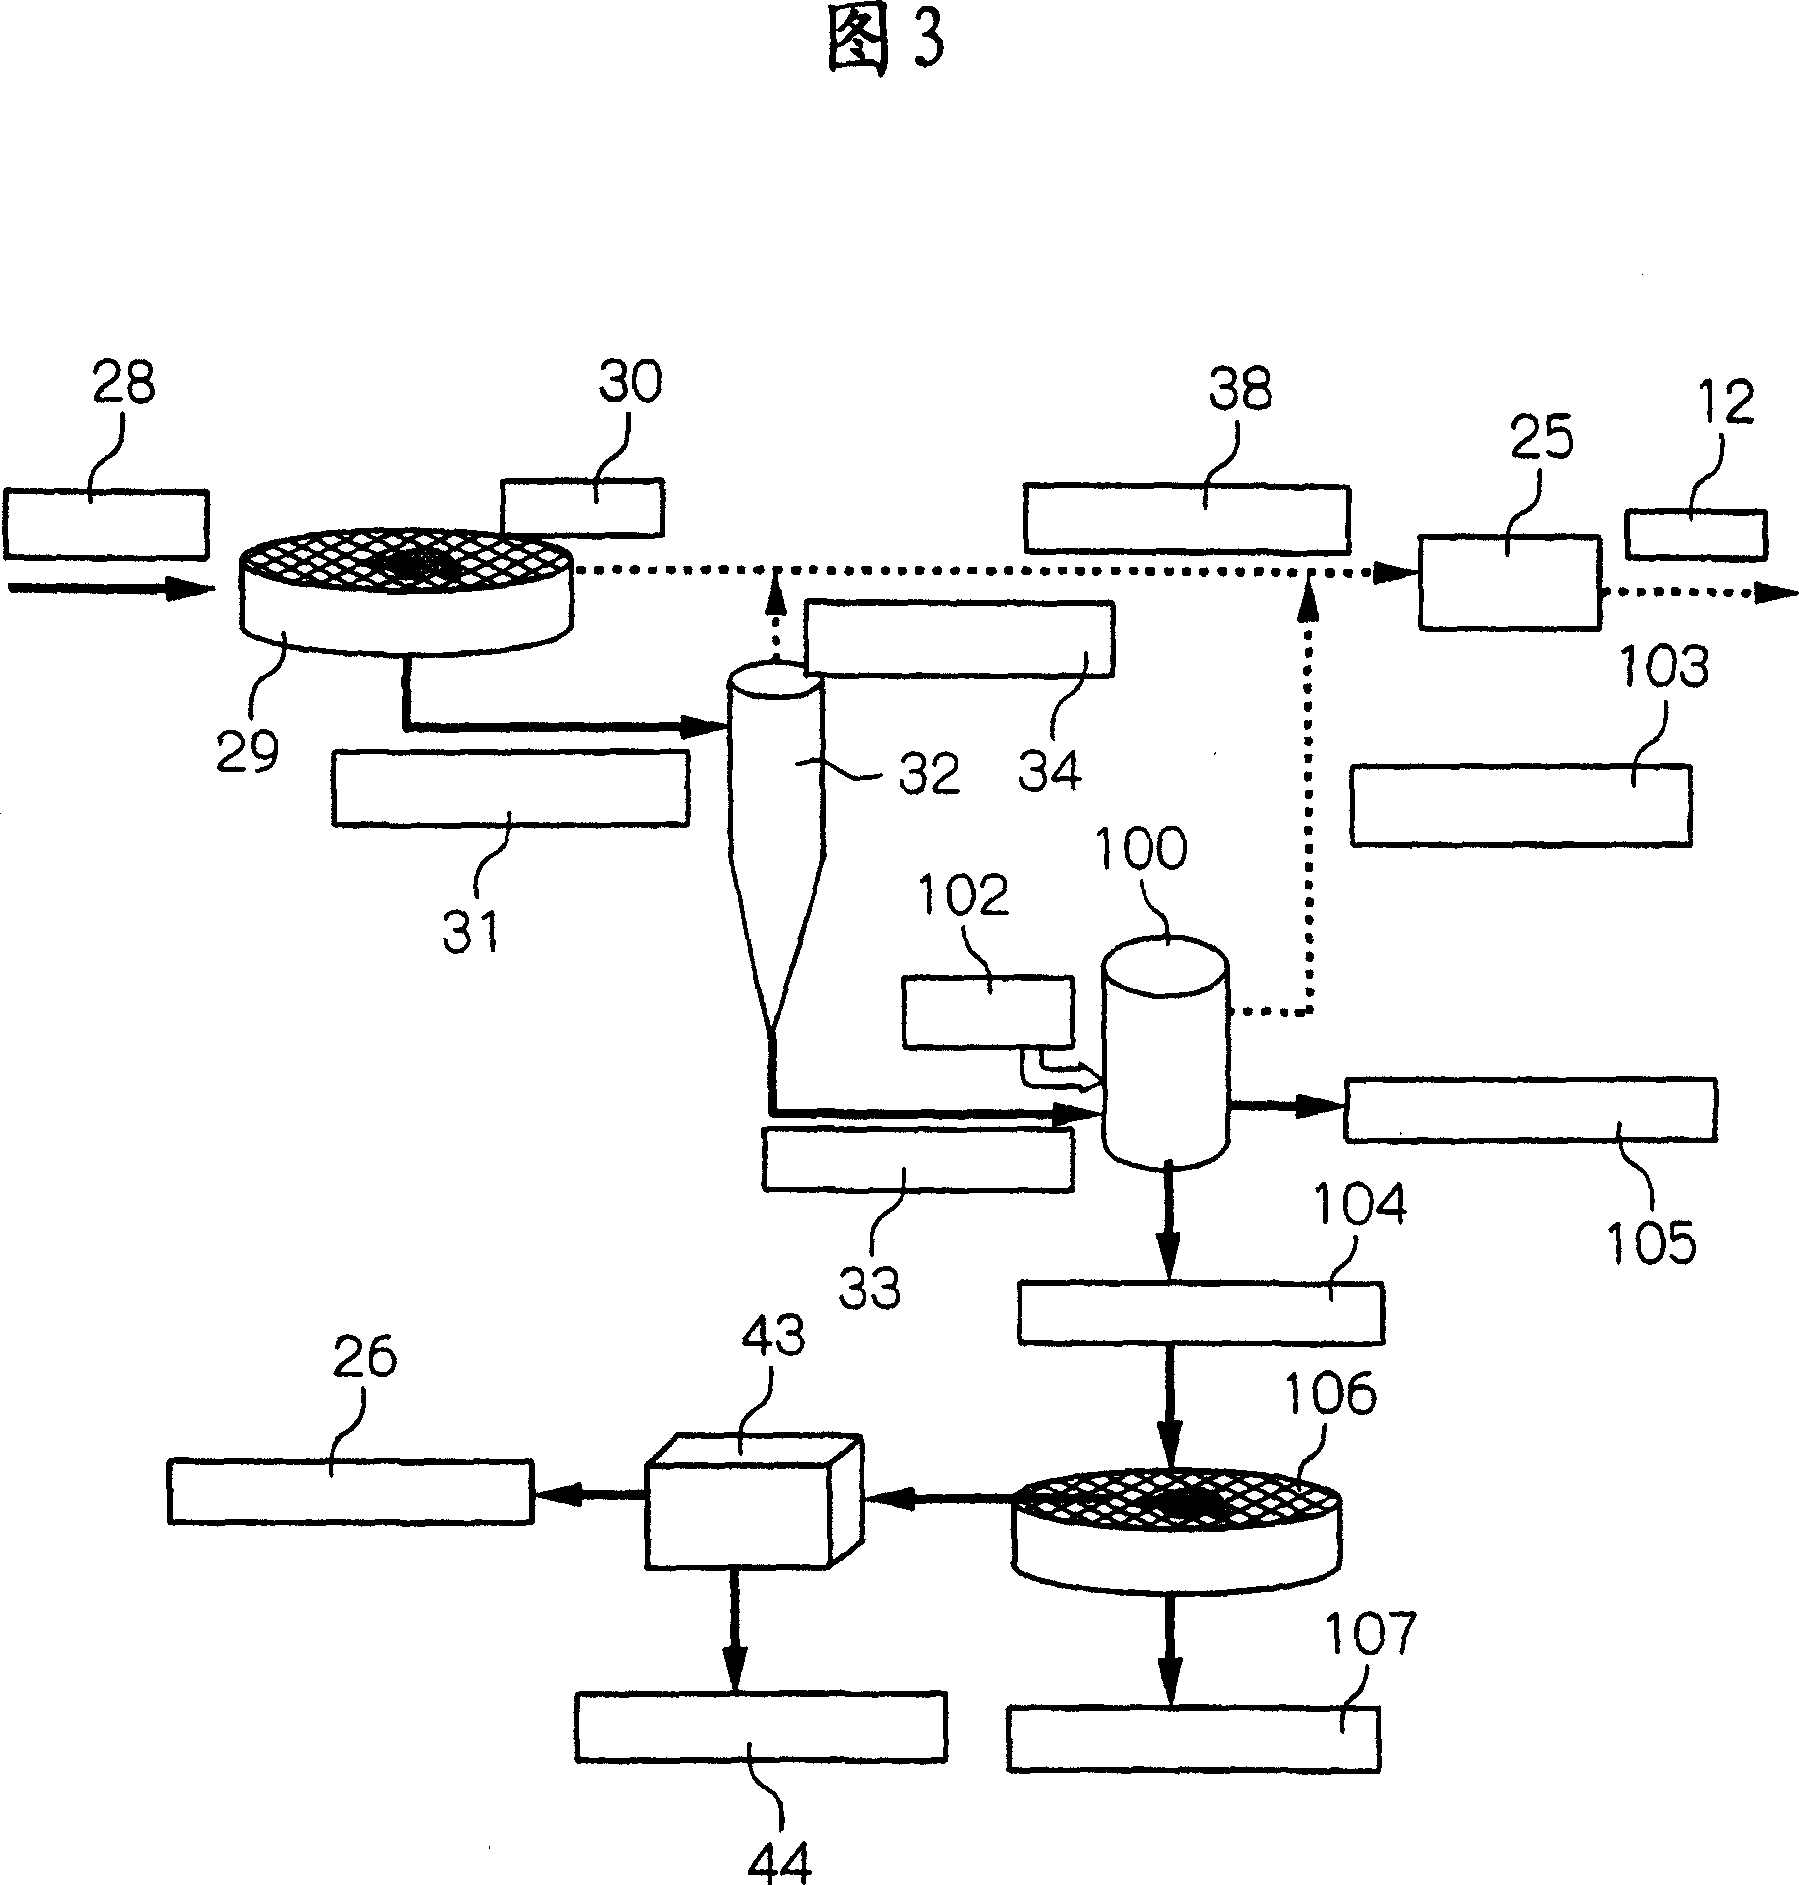 Method and apparatus for treating organic drainage and sludge